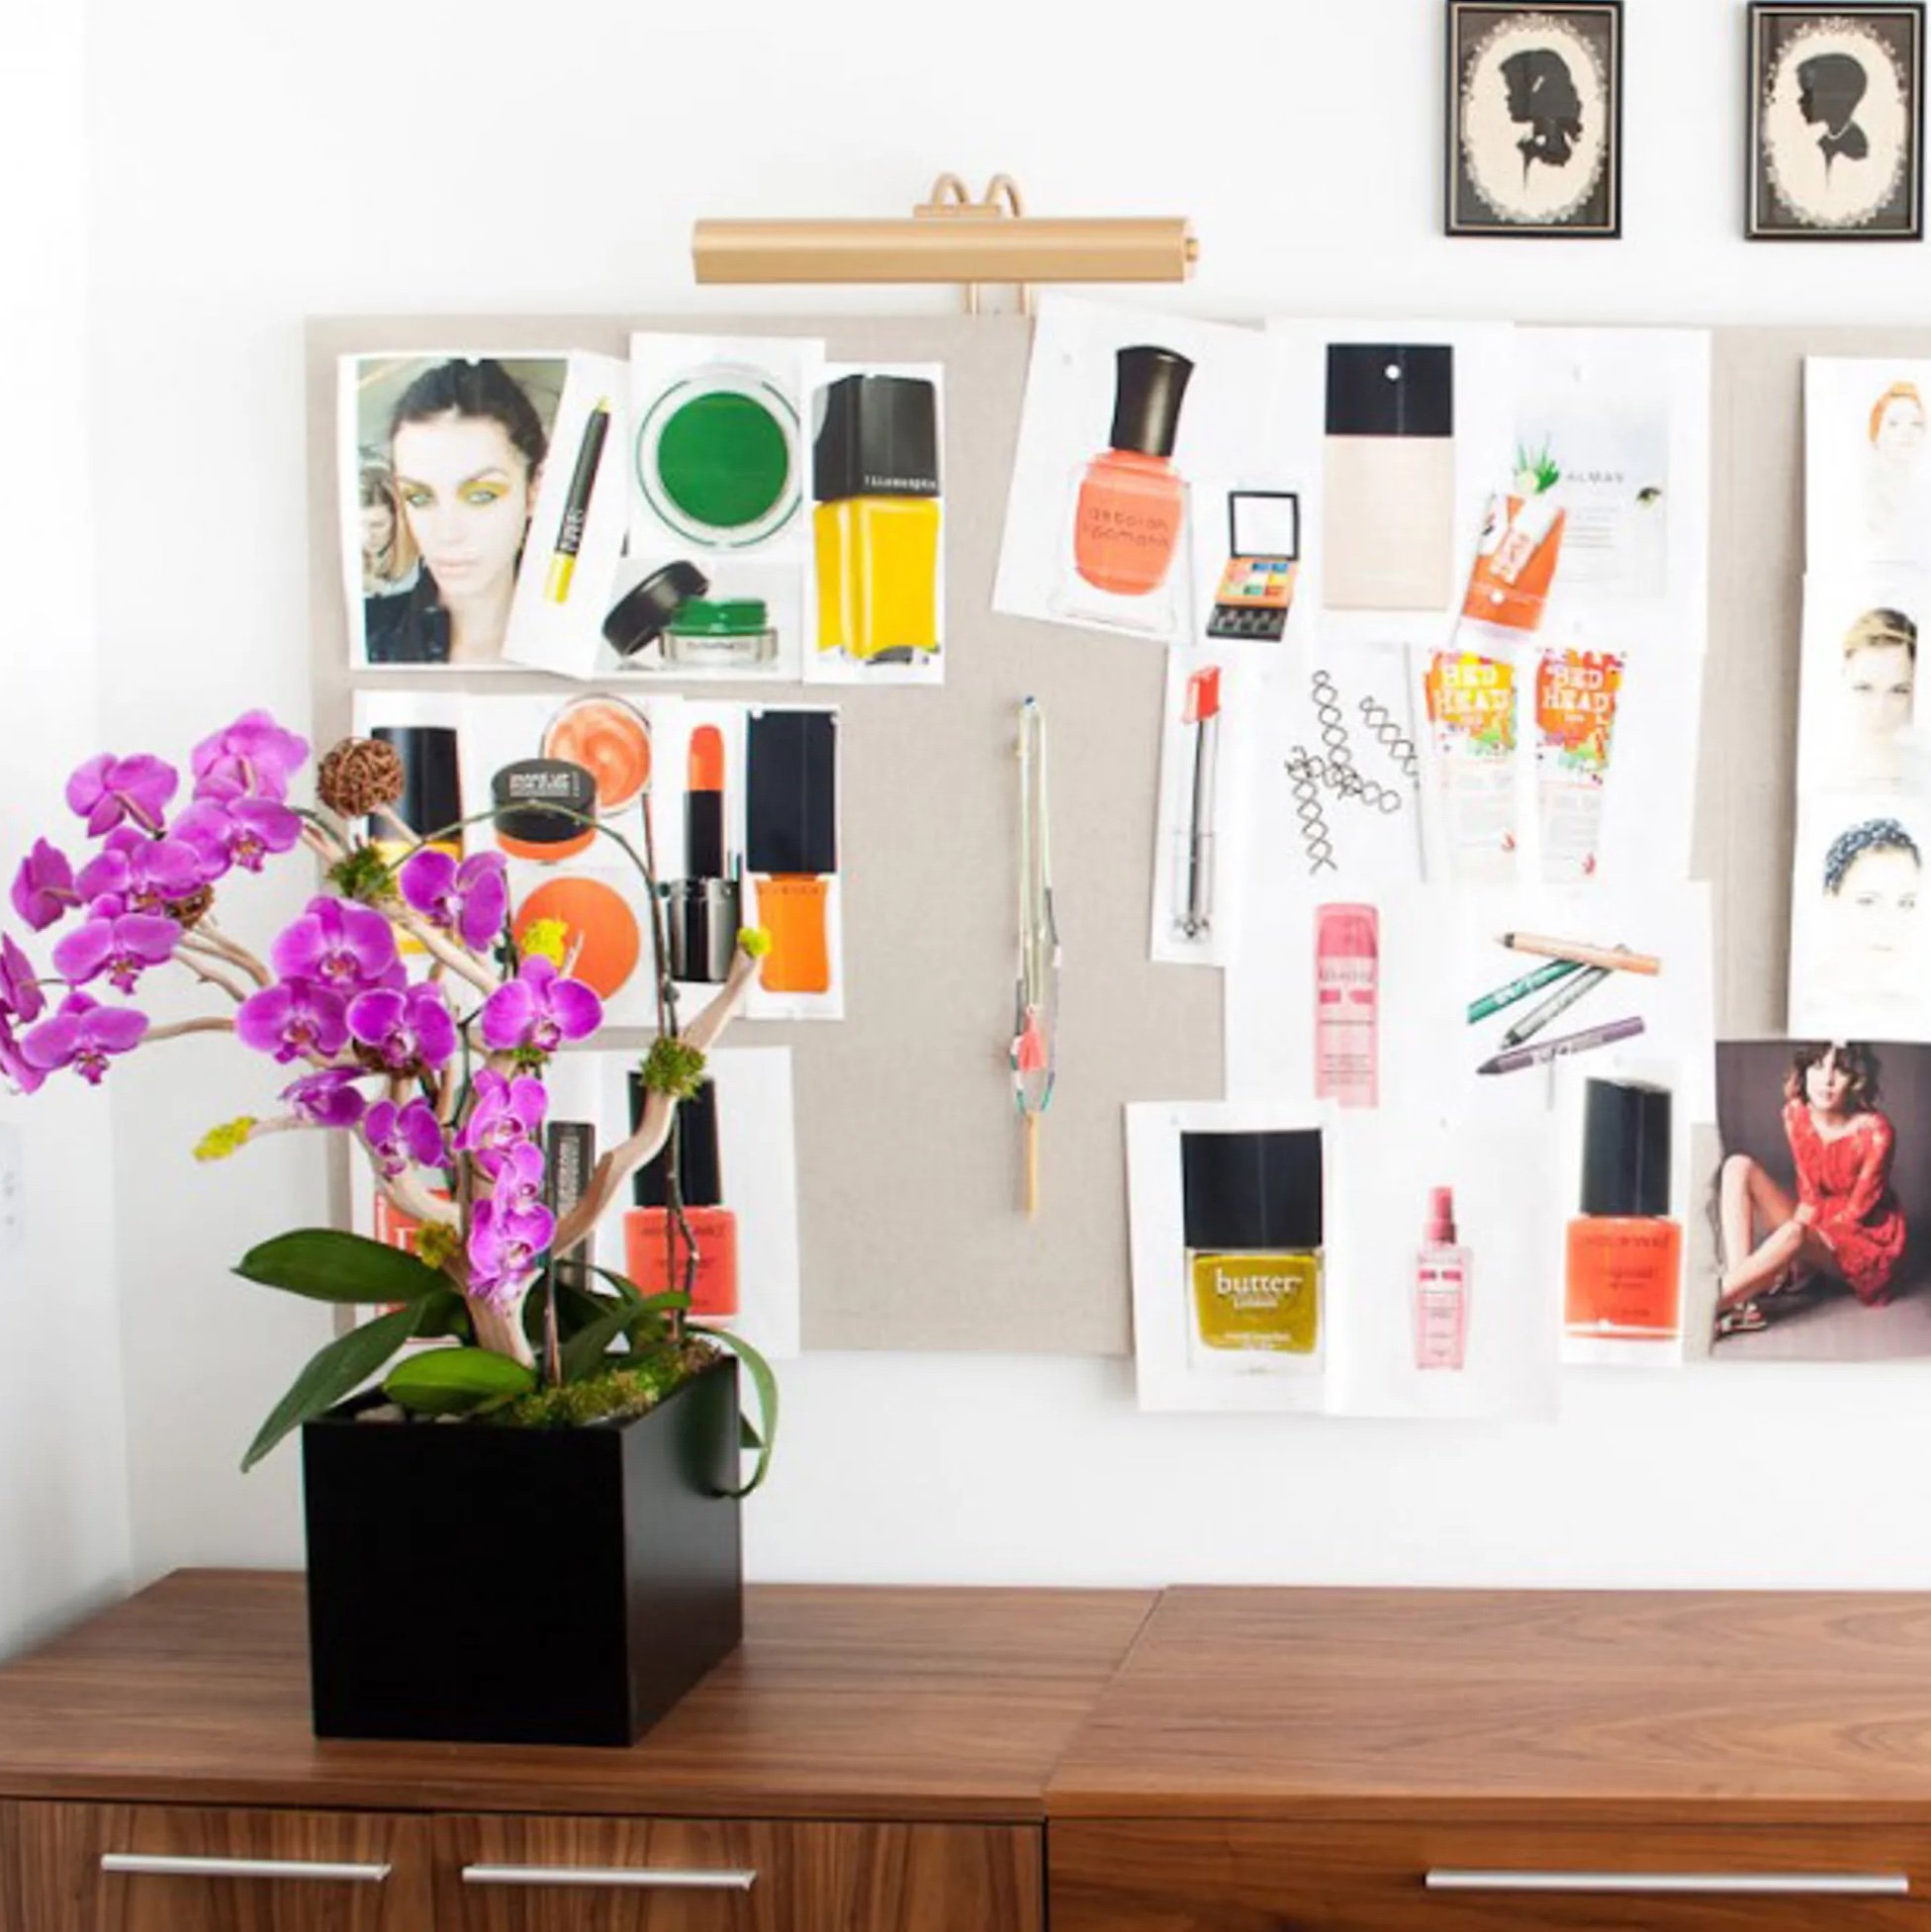 HOW TO FENG SHUI YOUR DESK